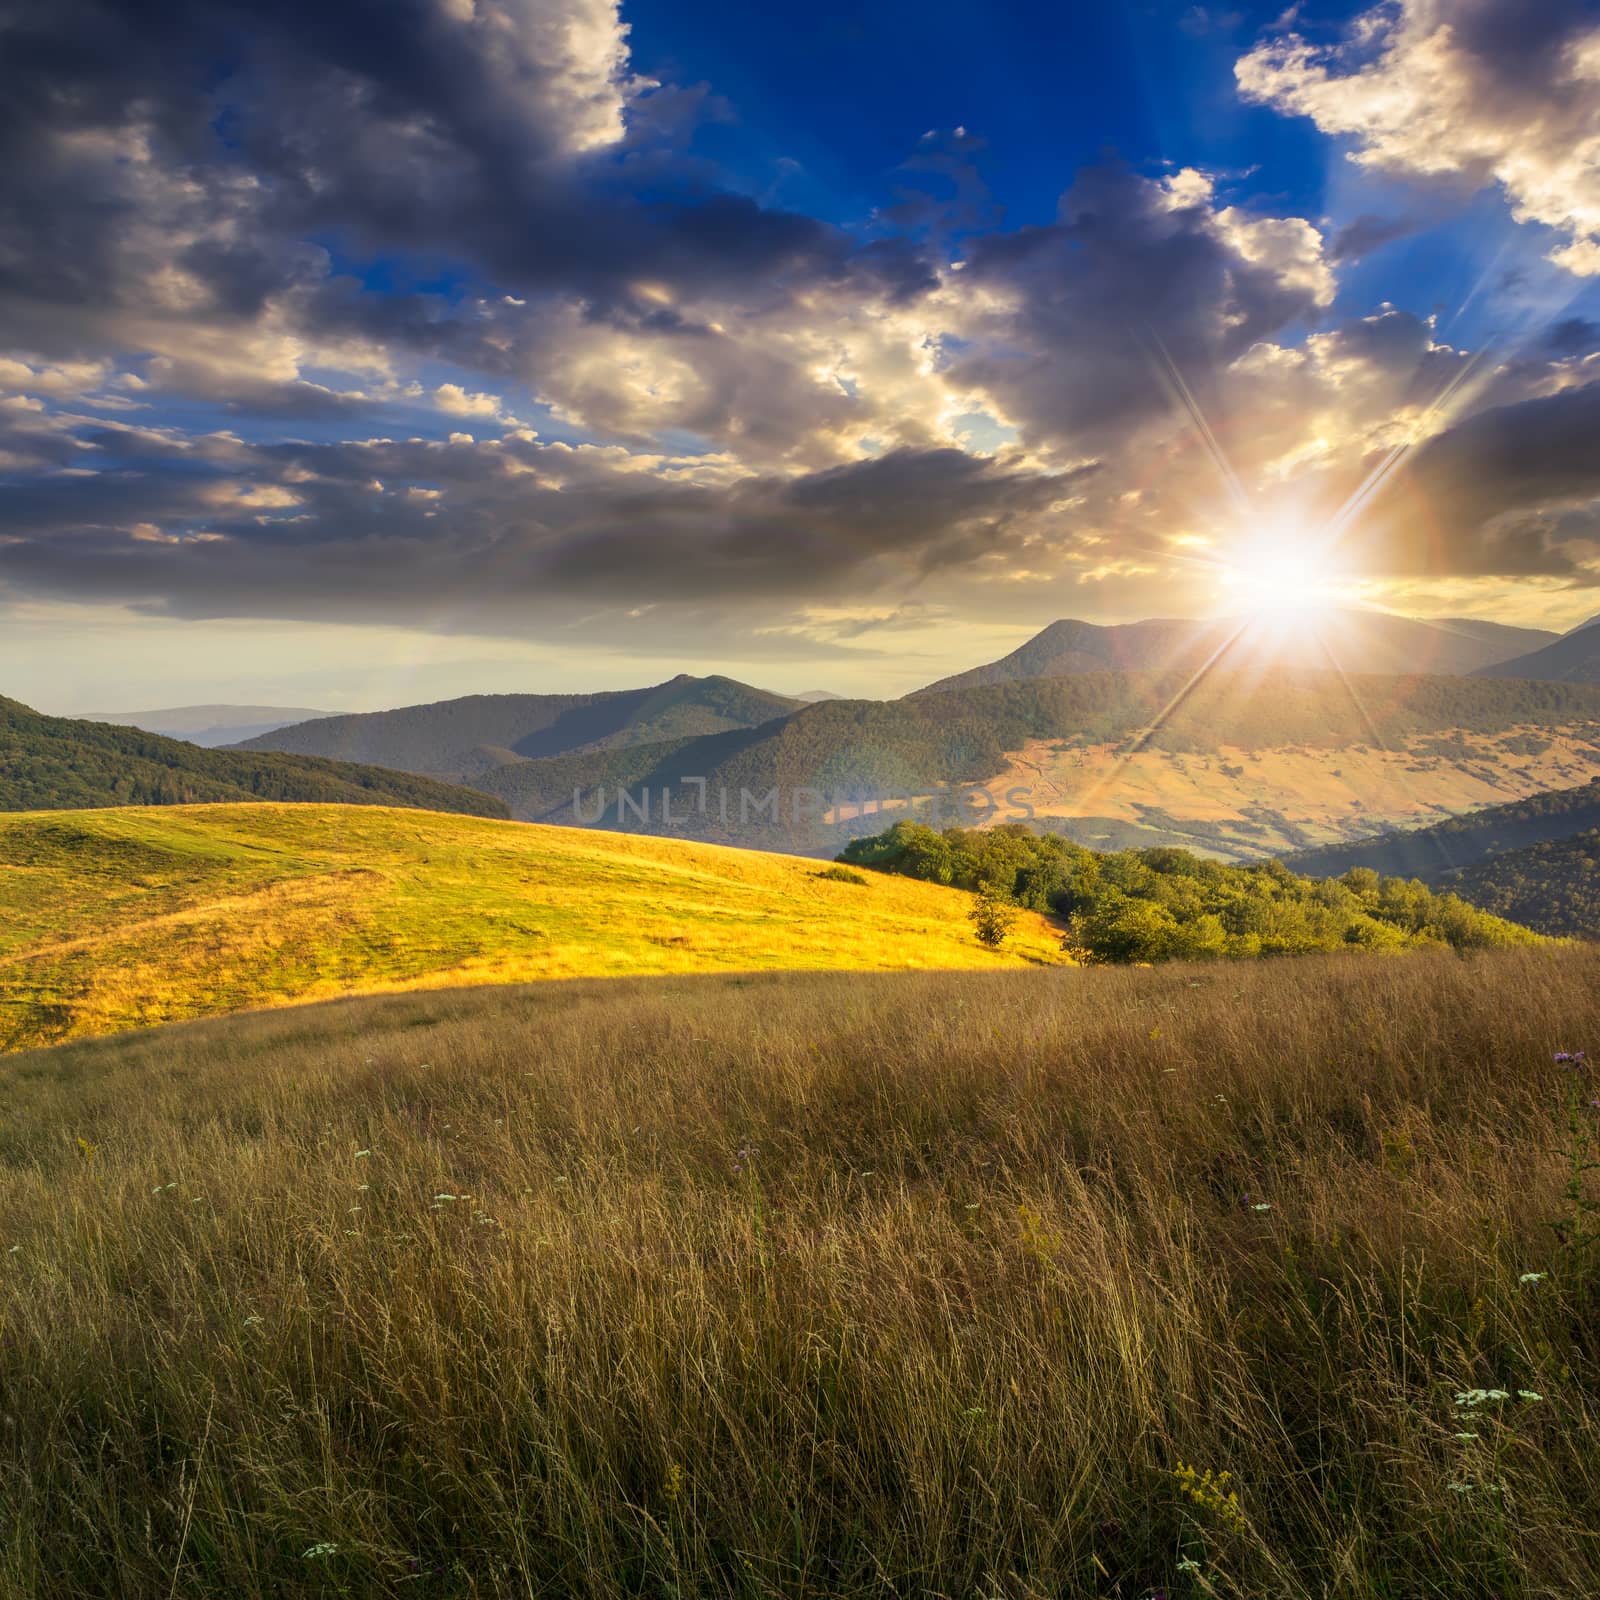 mountain summer landscape. trees near meadow and forest on hillside under  sky with clouds in rays of light at sunset